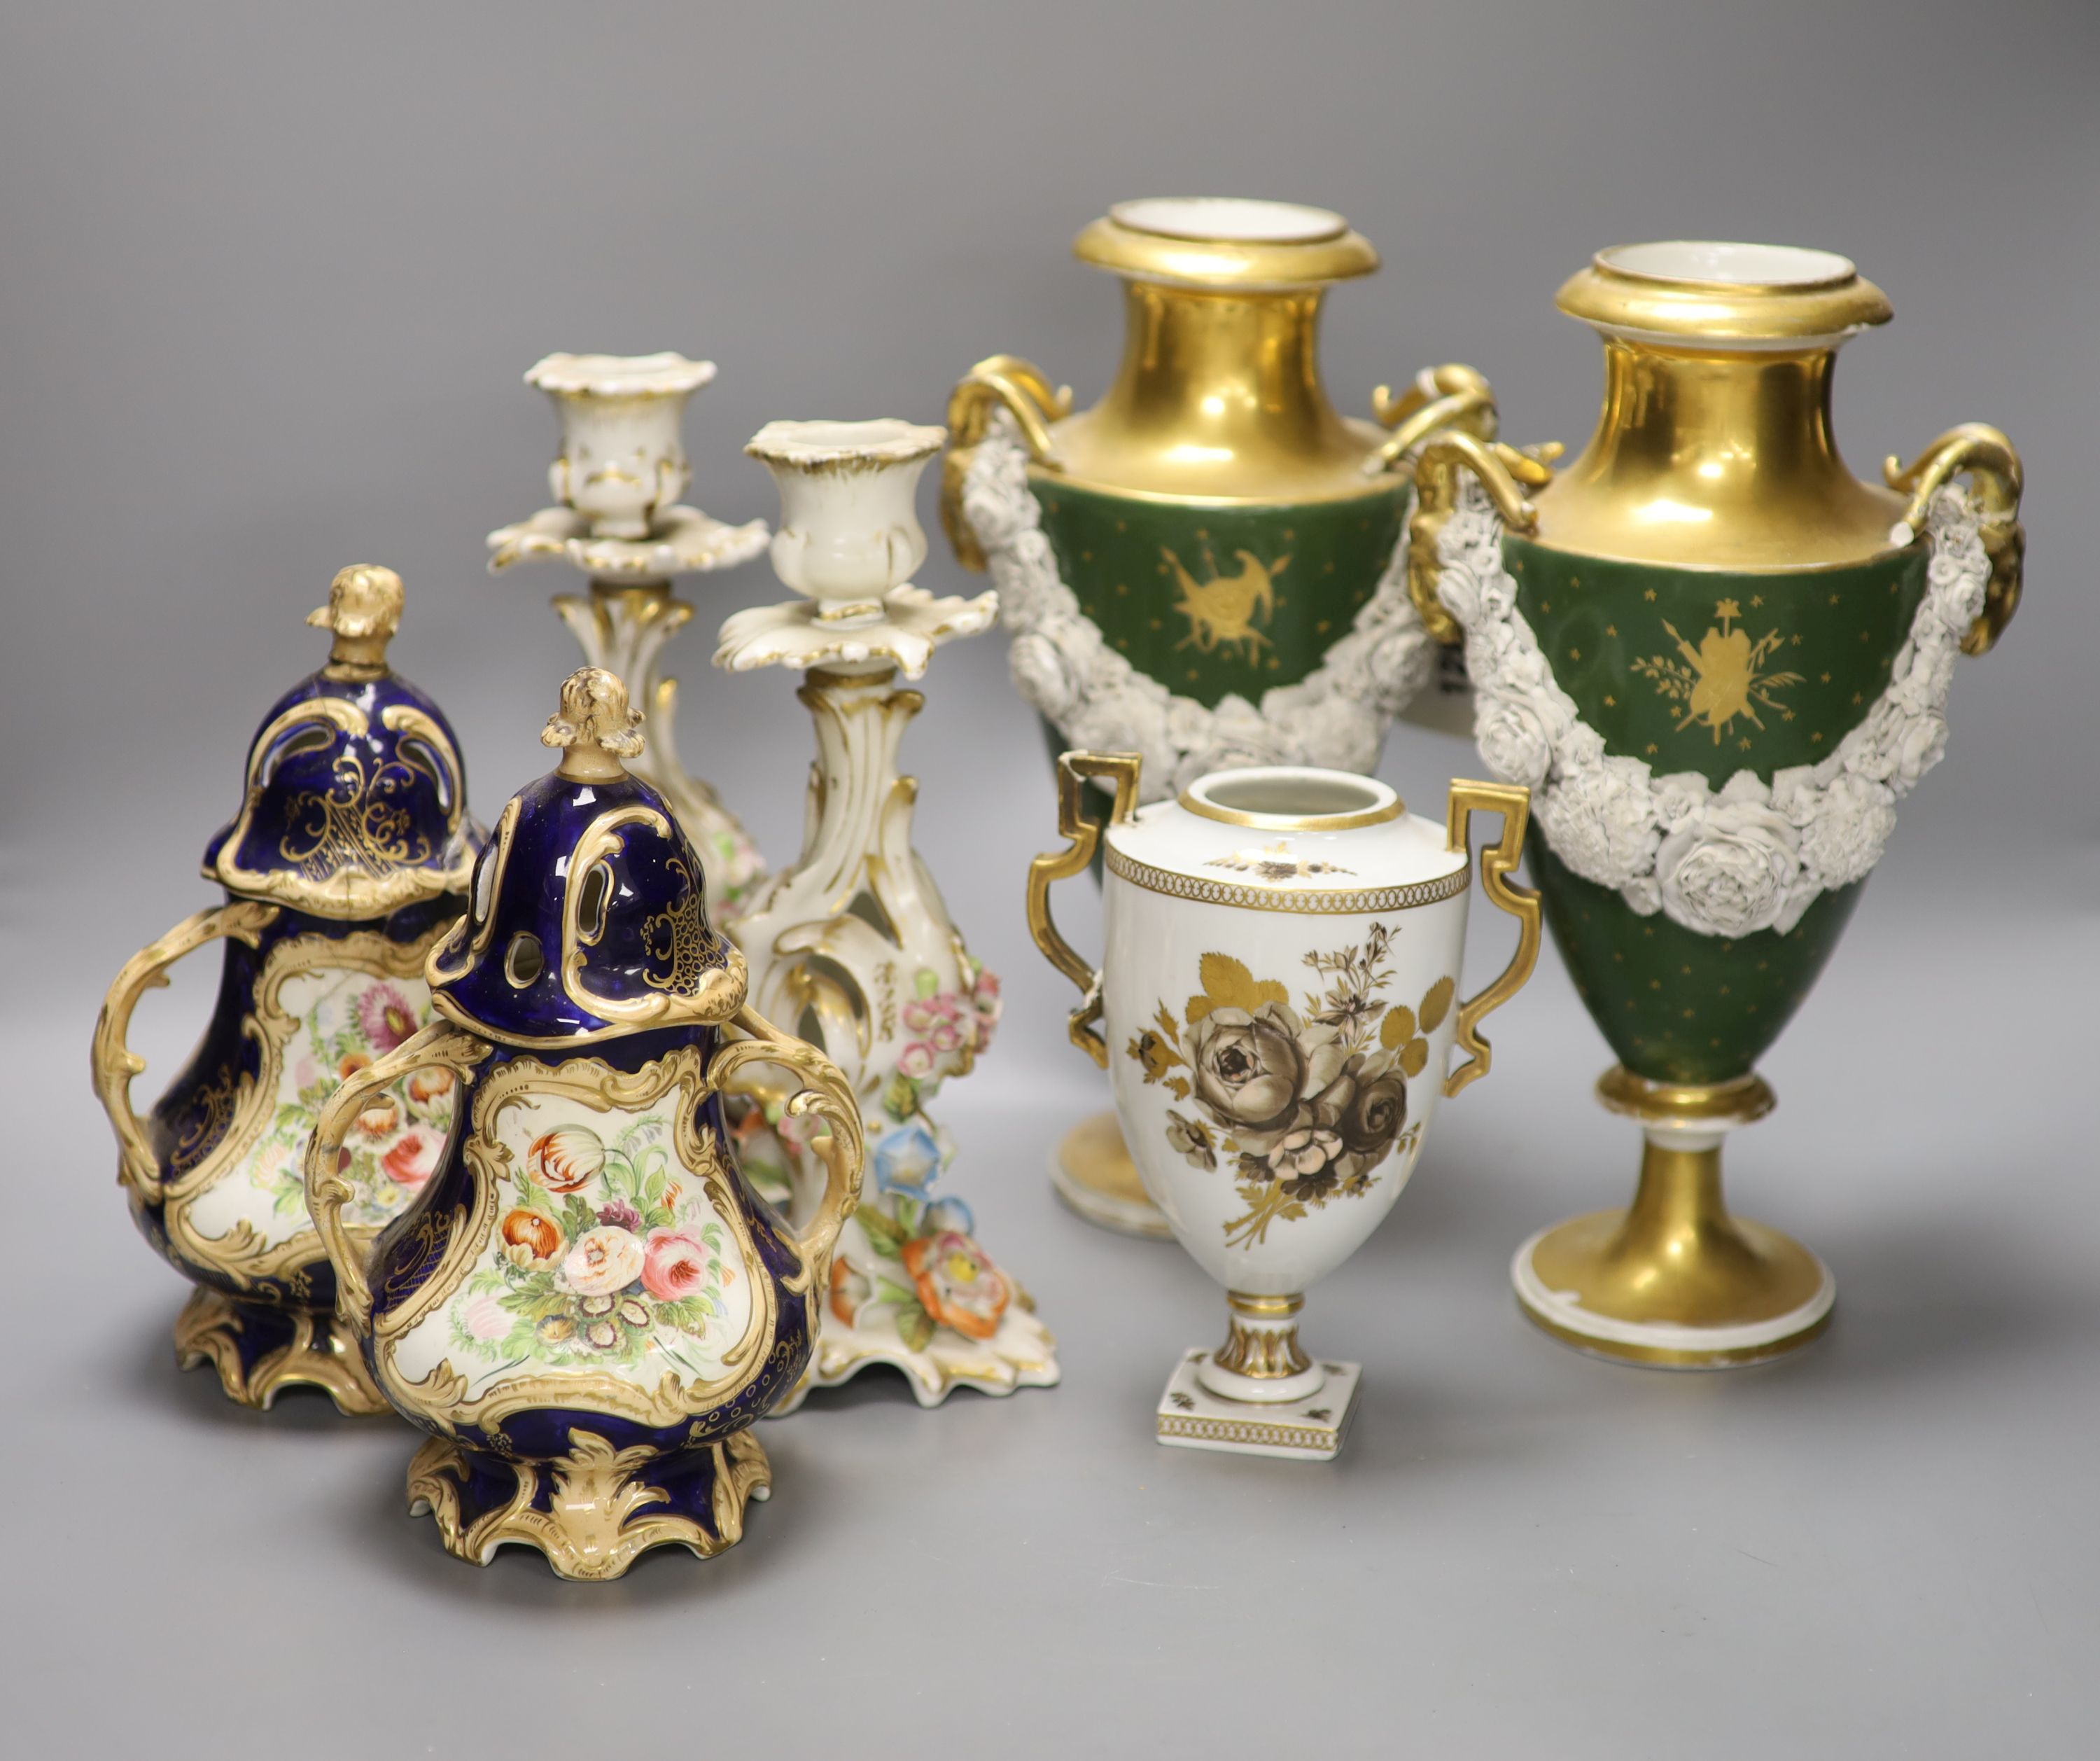 A pair of French porcelain vases, a pair Coalbrookdale style vases, a pair of Paris candlesticks and a Meissen Marcolini period vase, t